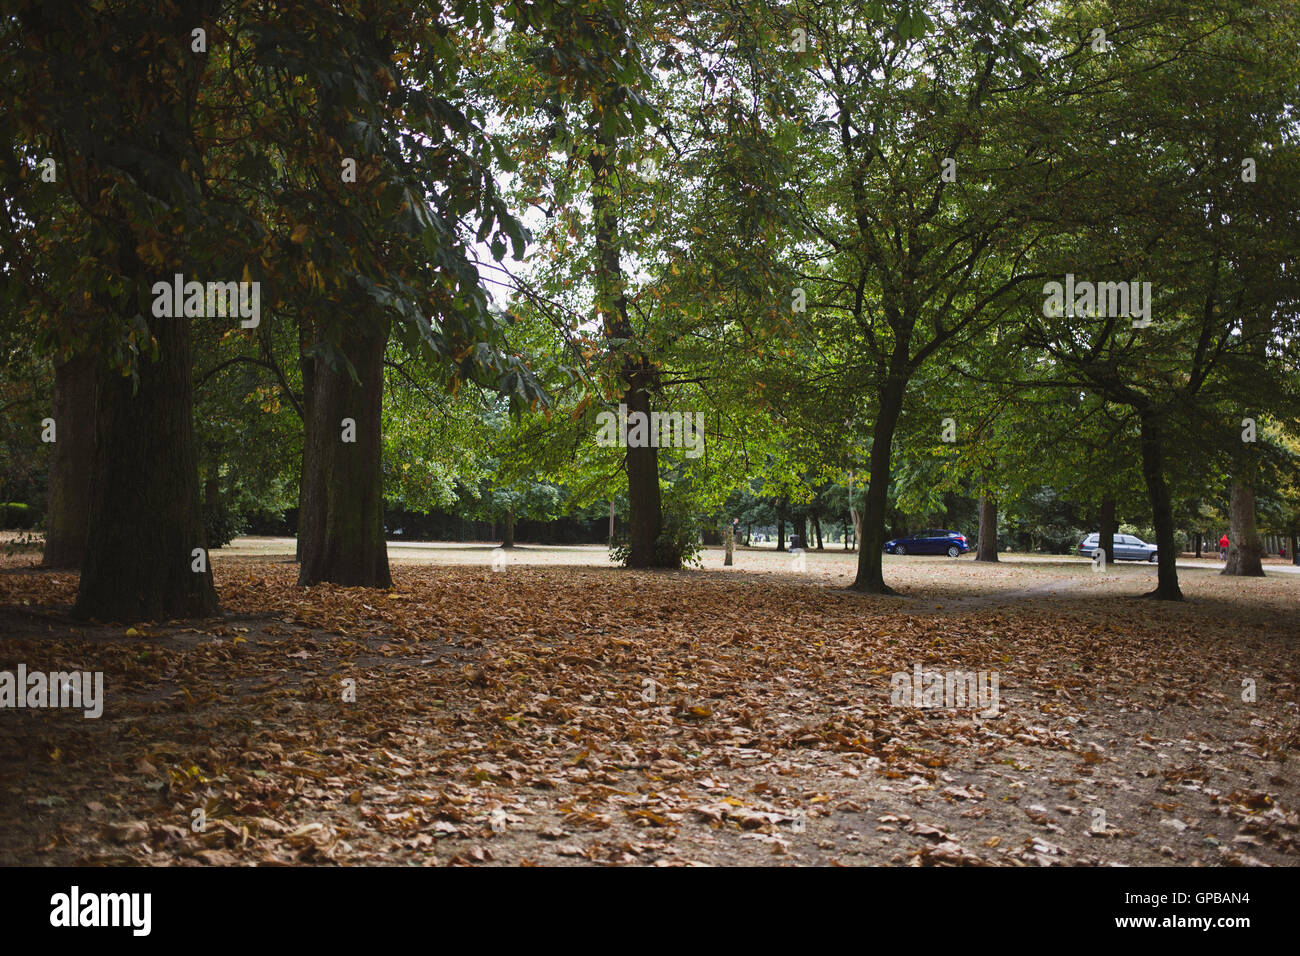 Green trees and brown leaves on ground in Victoria Park, London. Stock Photo